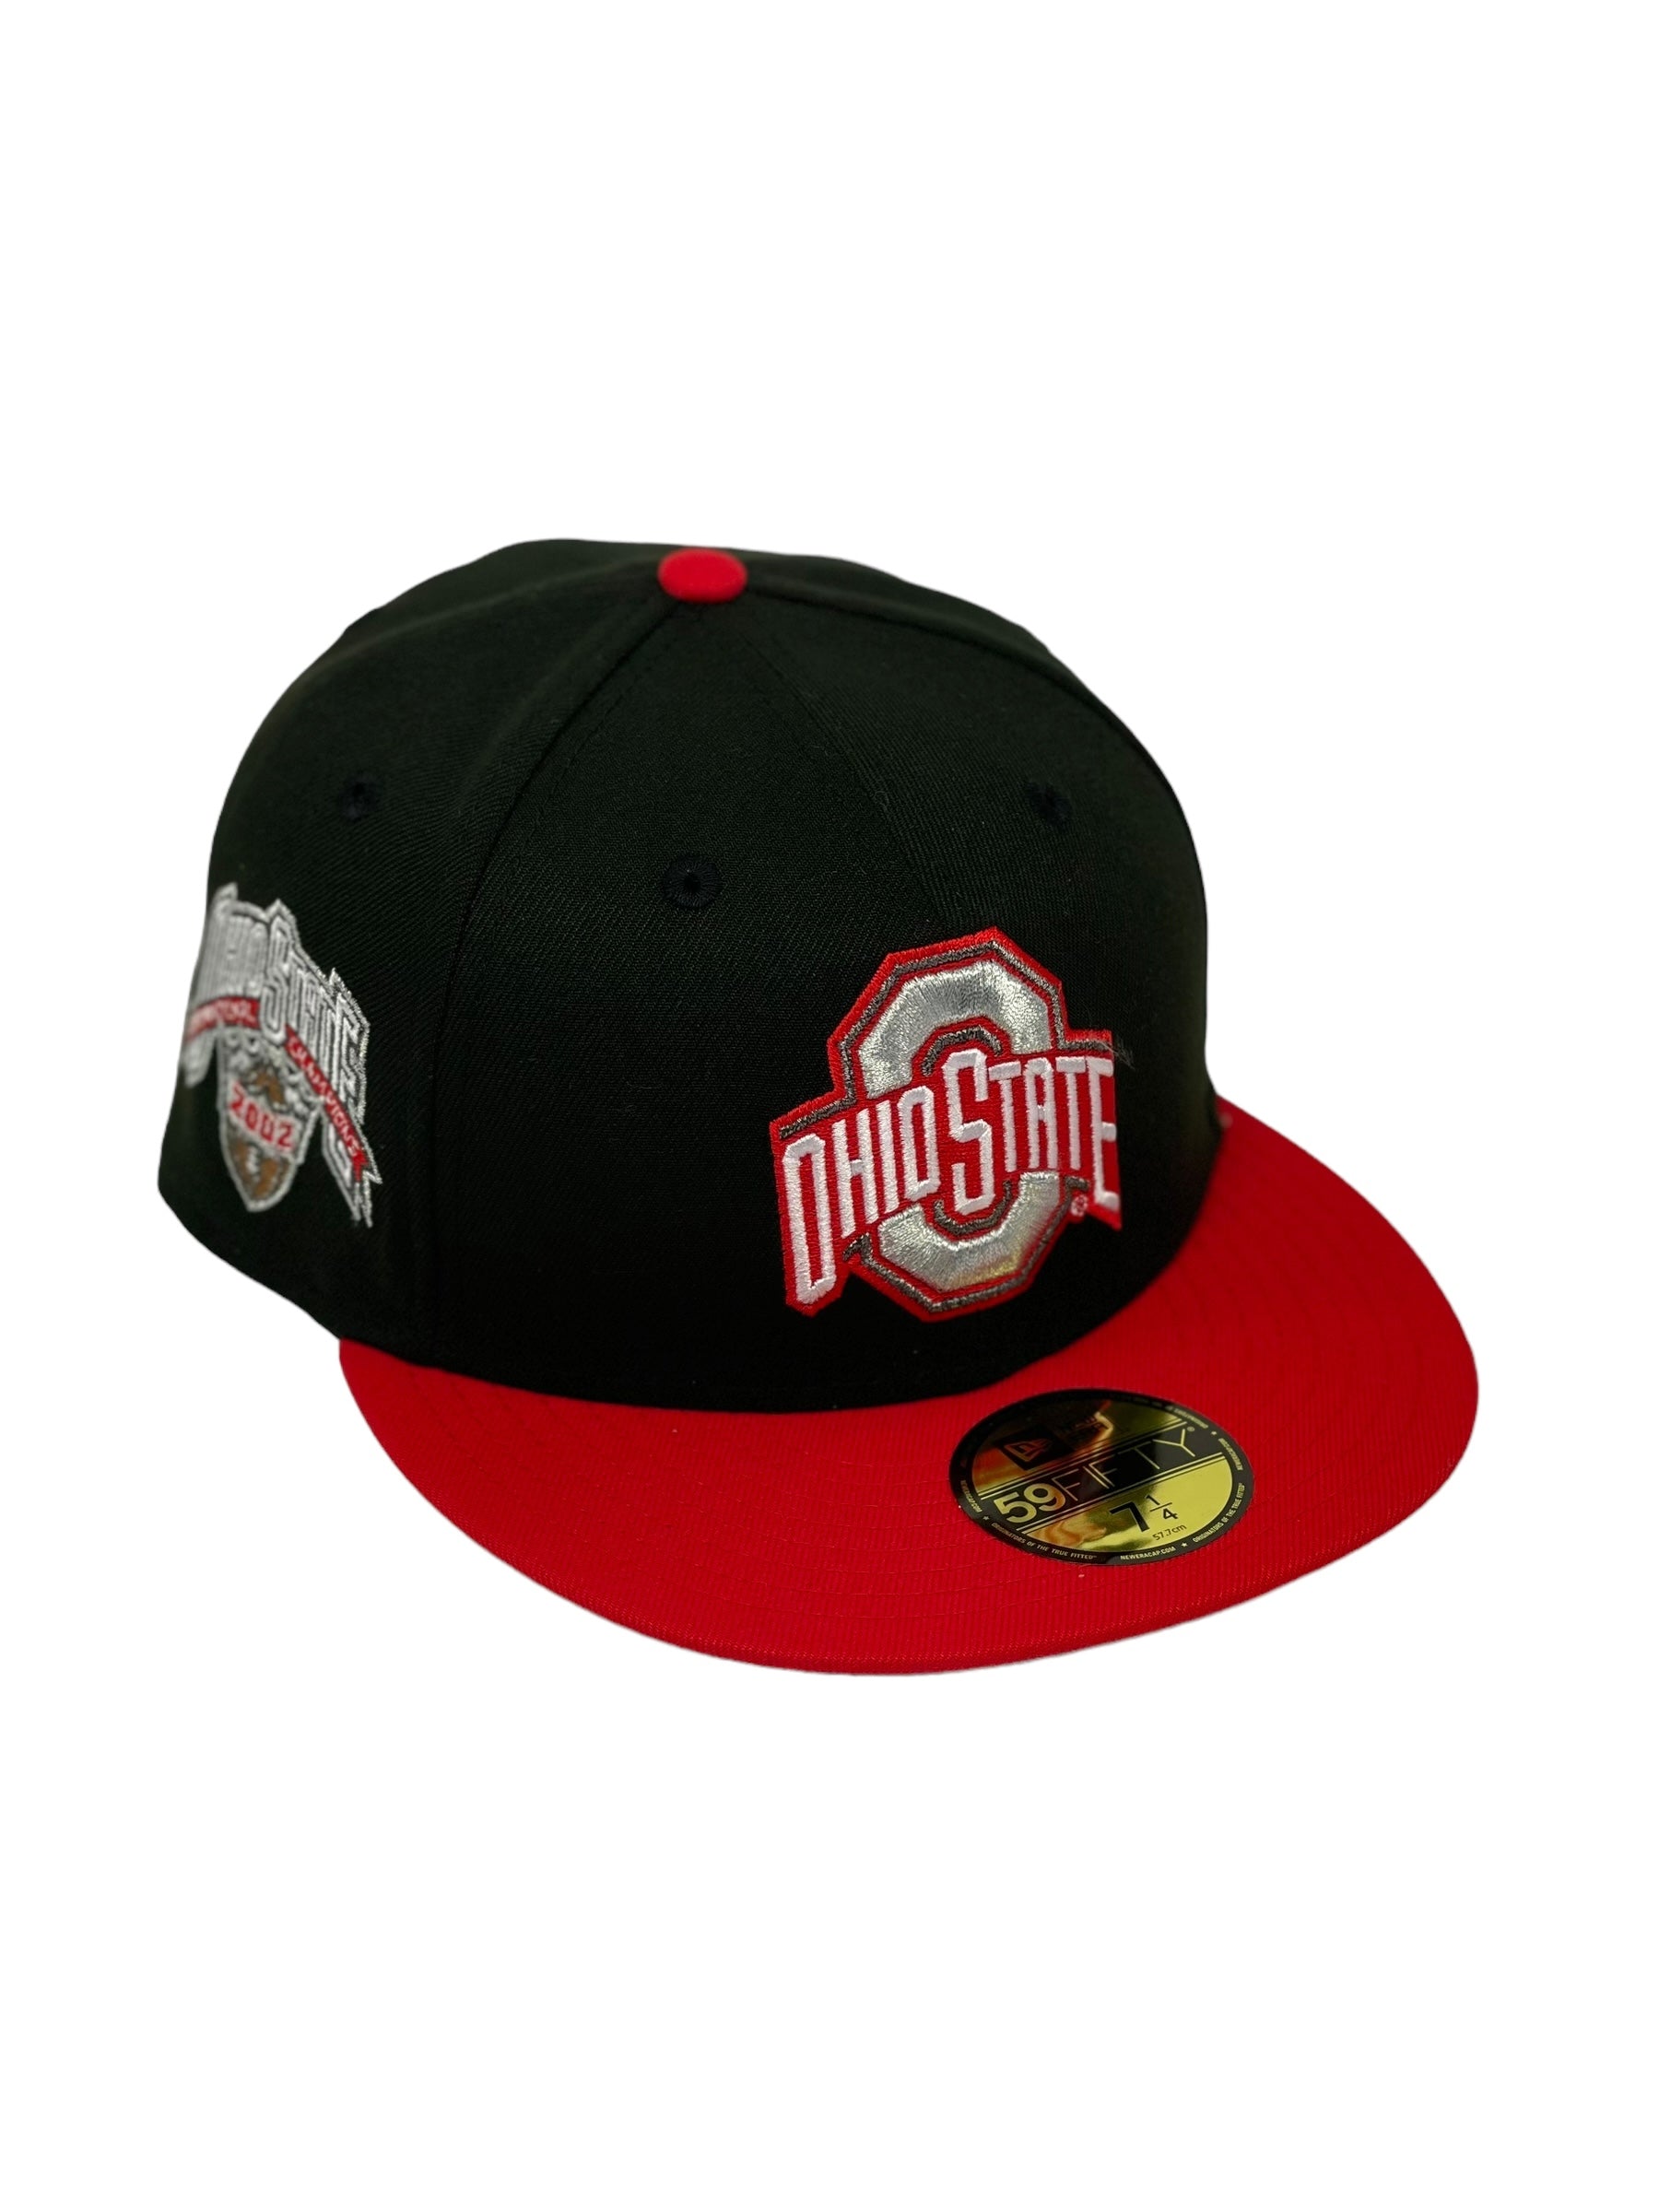 OHIO STATE BUCKEYES (BLACK) (2002 CHAMPS) NEW ERA 59FIFTY FITTED